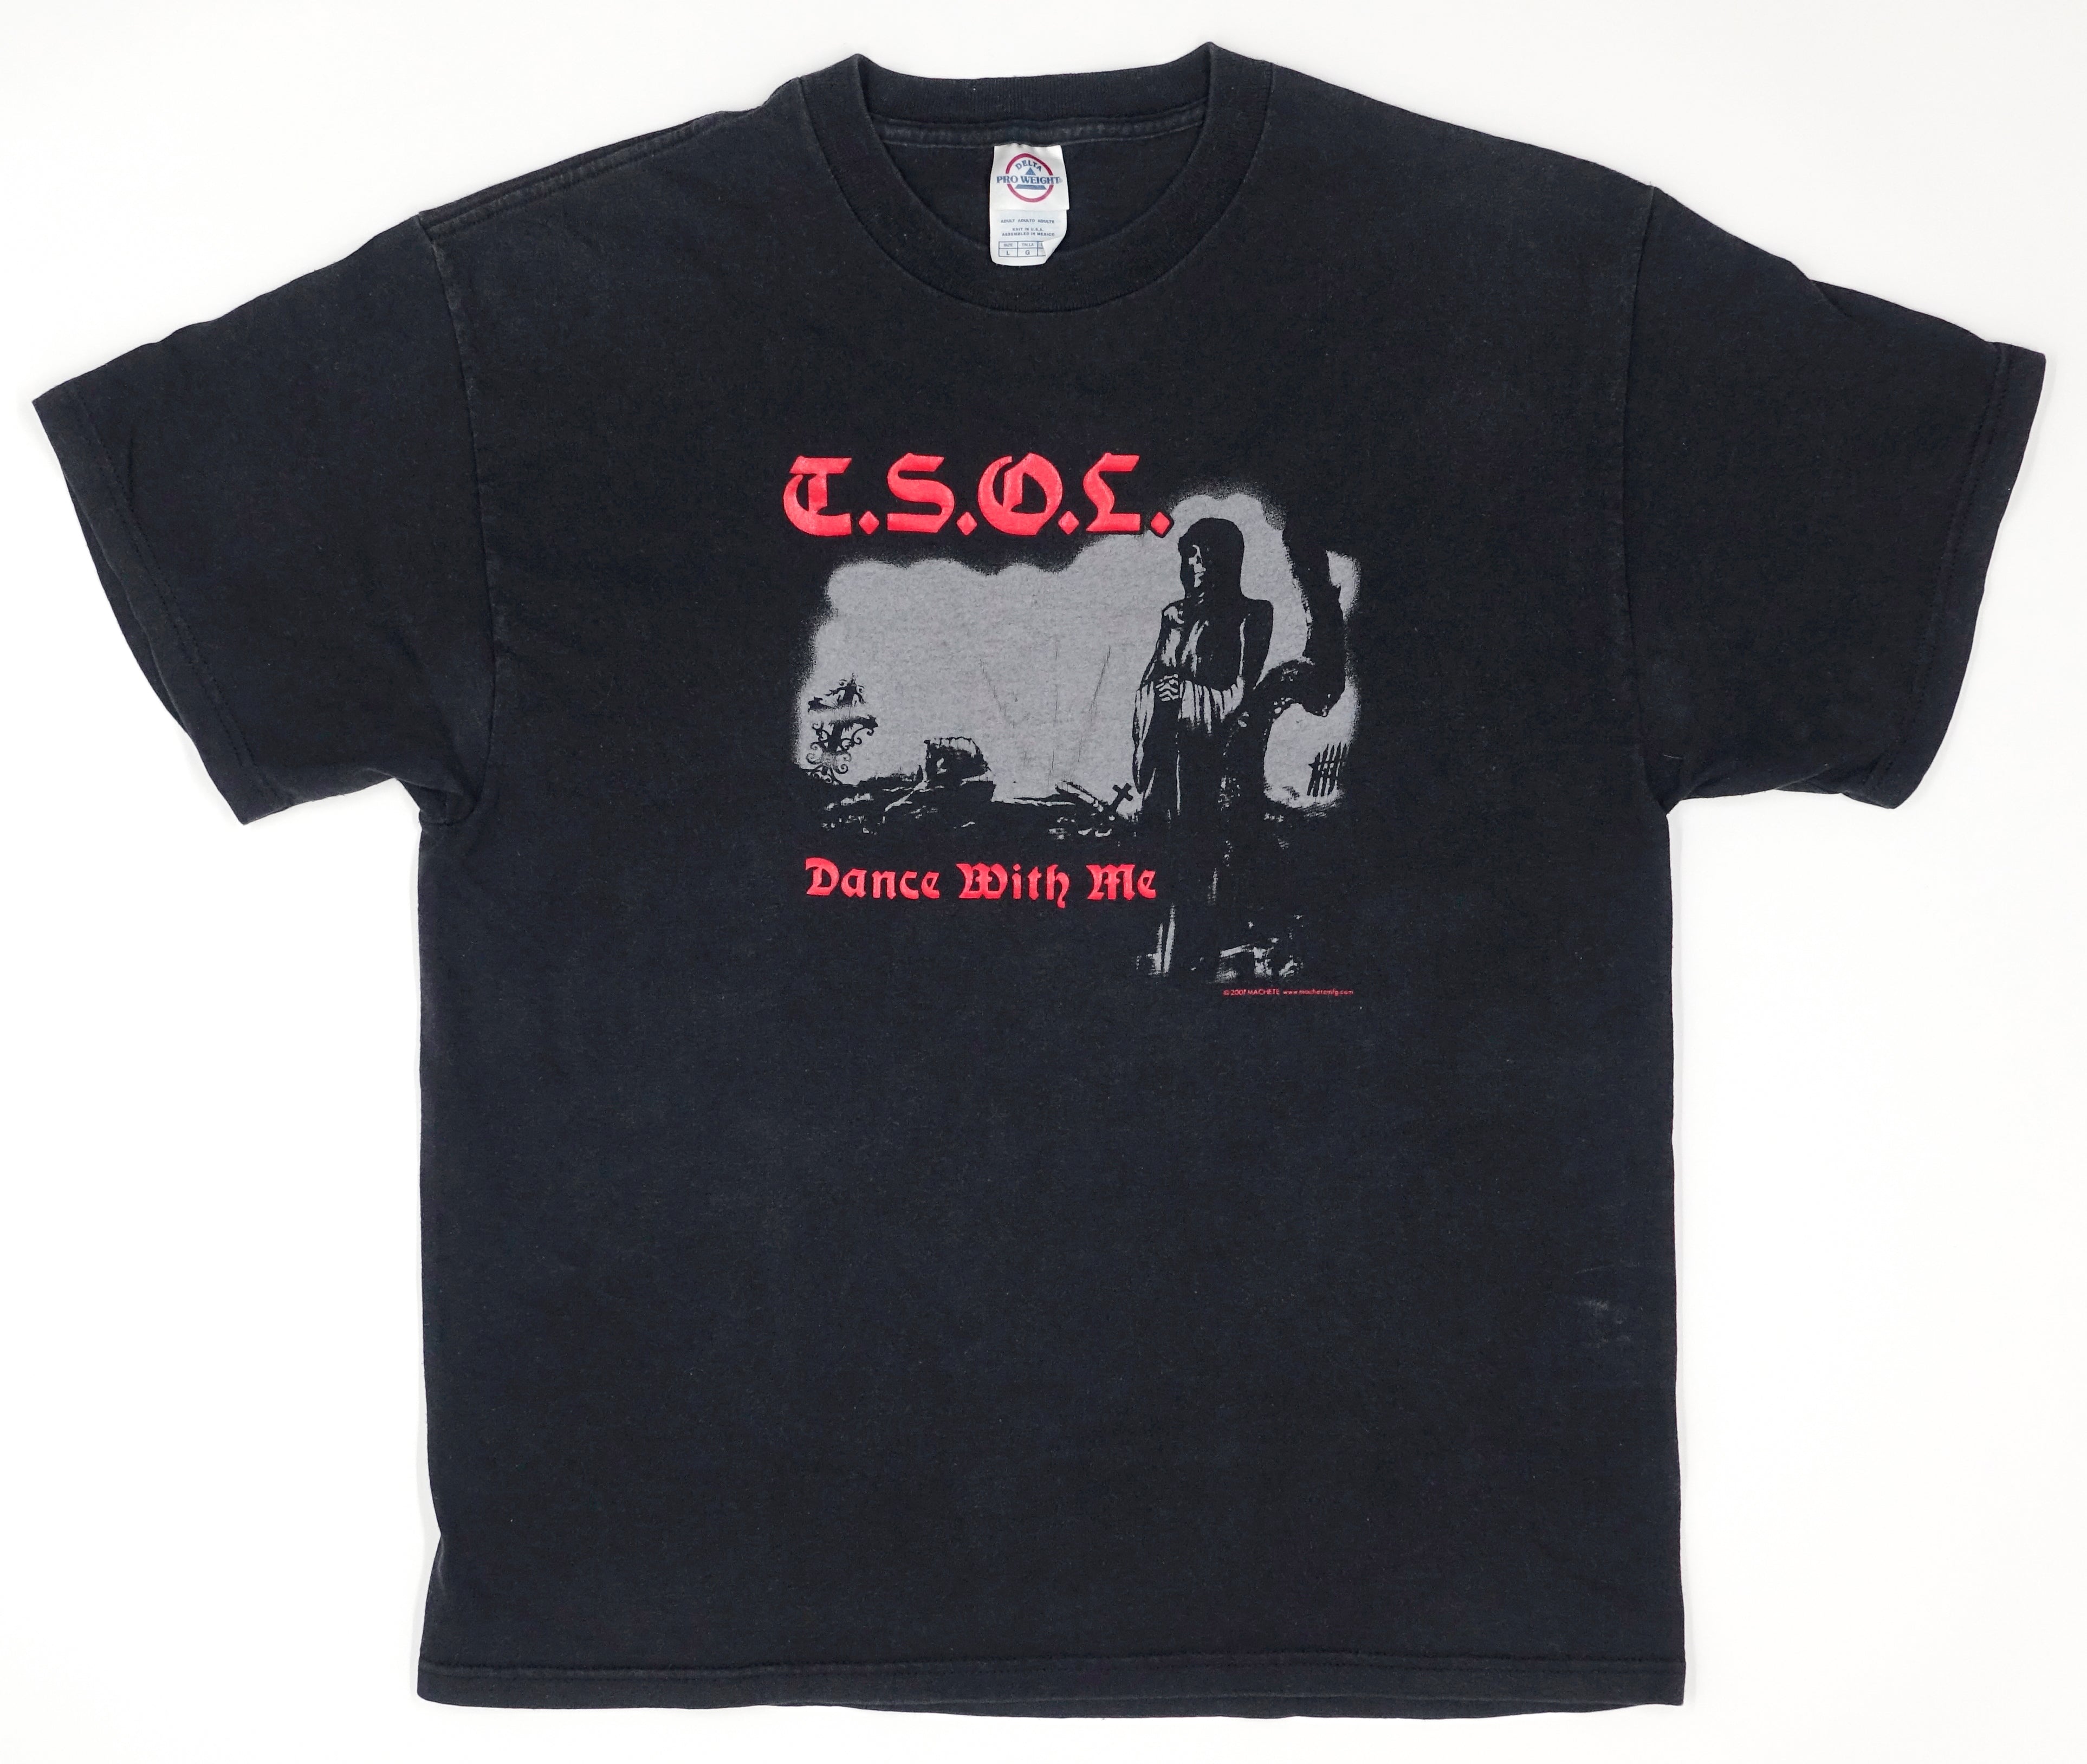 T.S.O.L. - Dance With Me ©2001 Tour Shirt Size Large